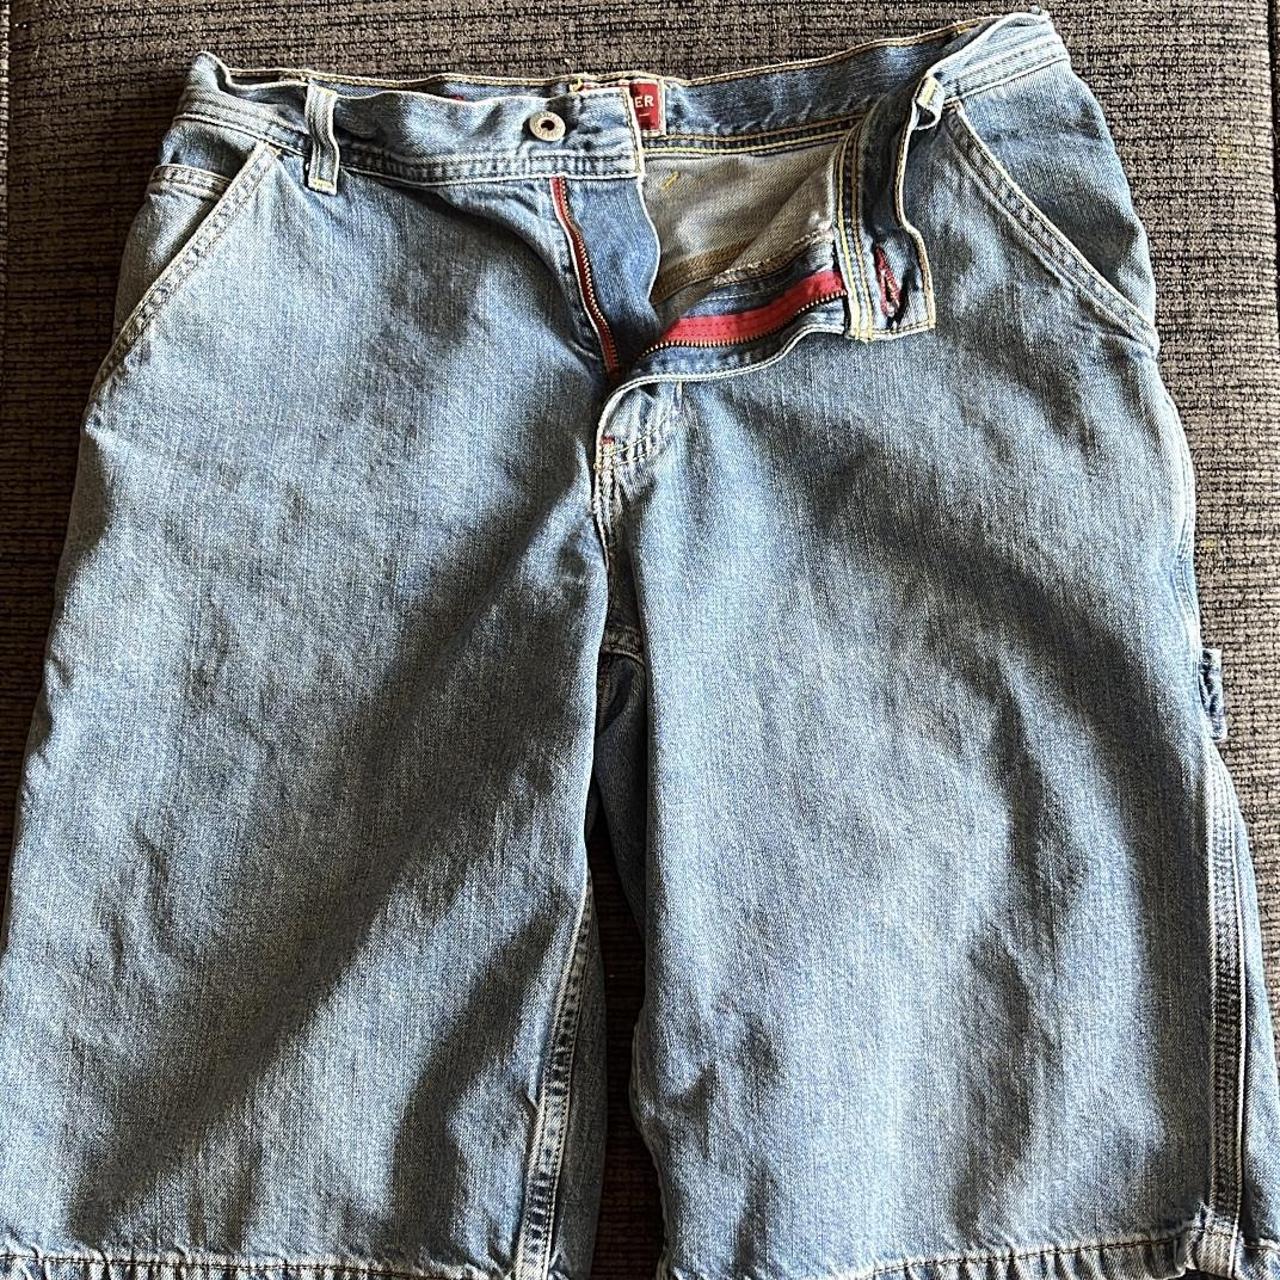 Product Image 2 - Hilfiger Jorts
Lightly worn, no stains